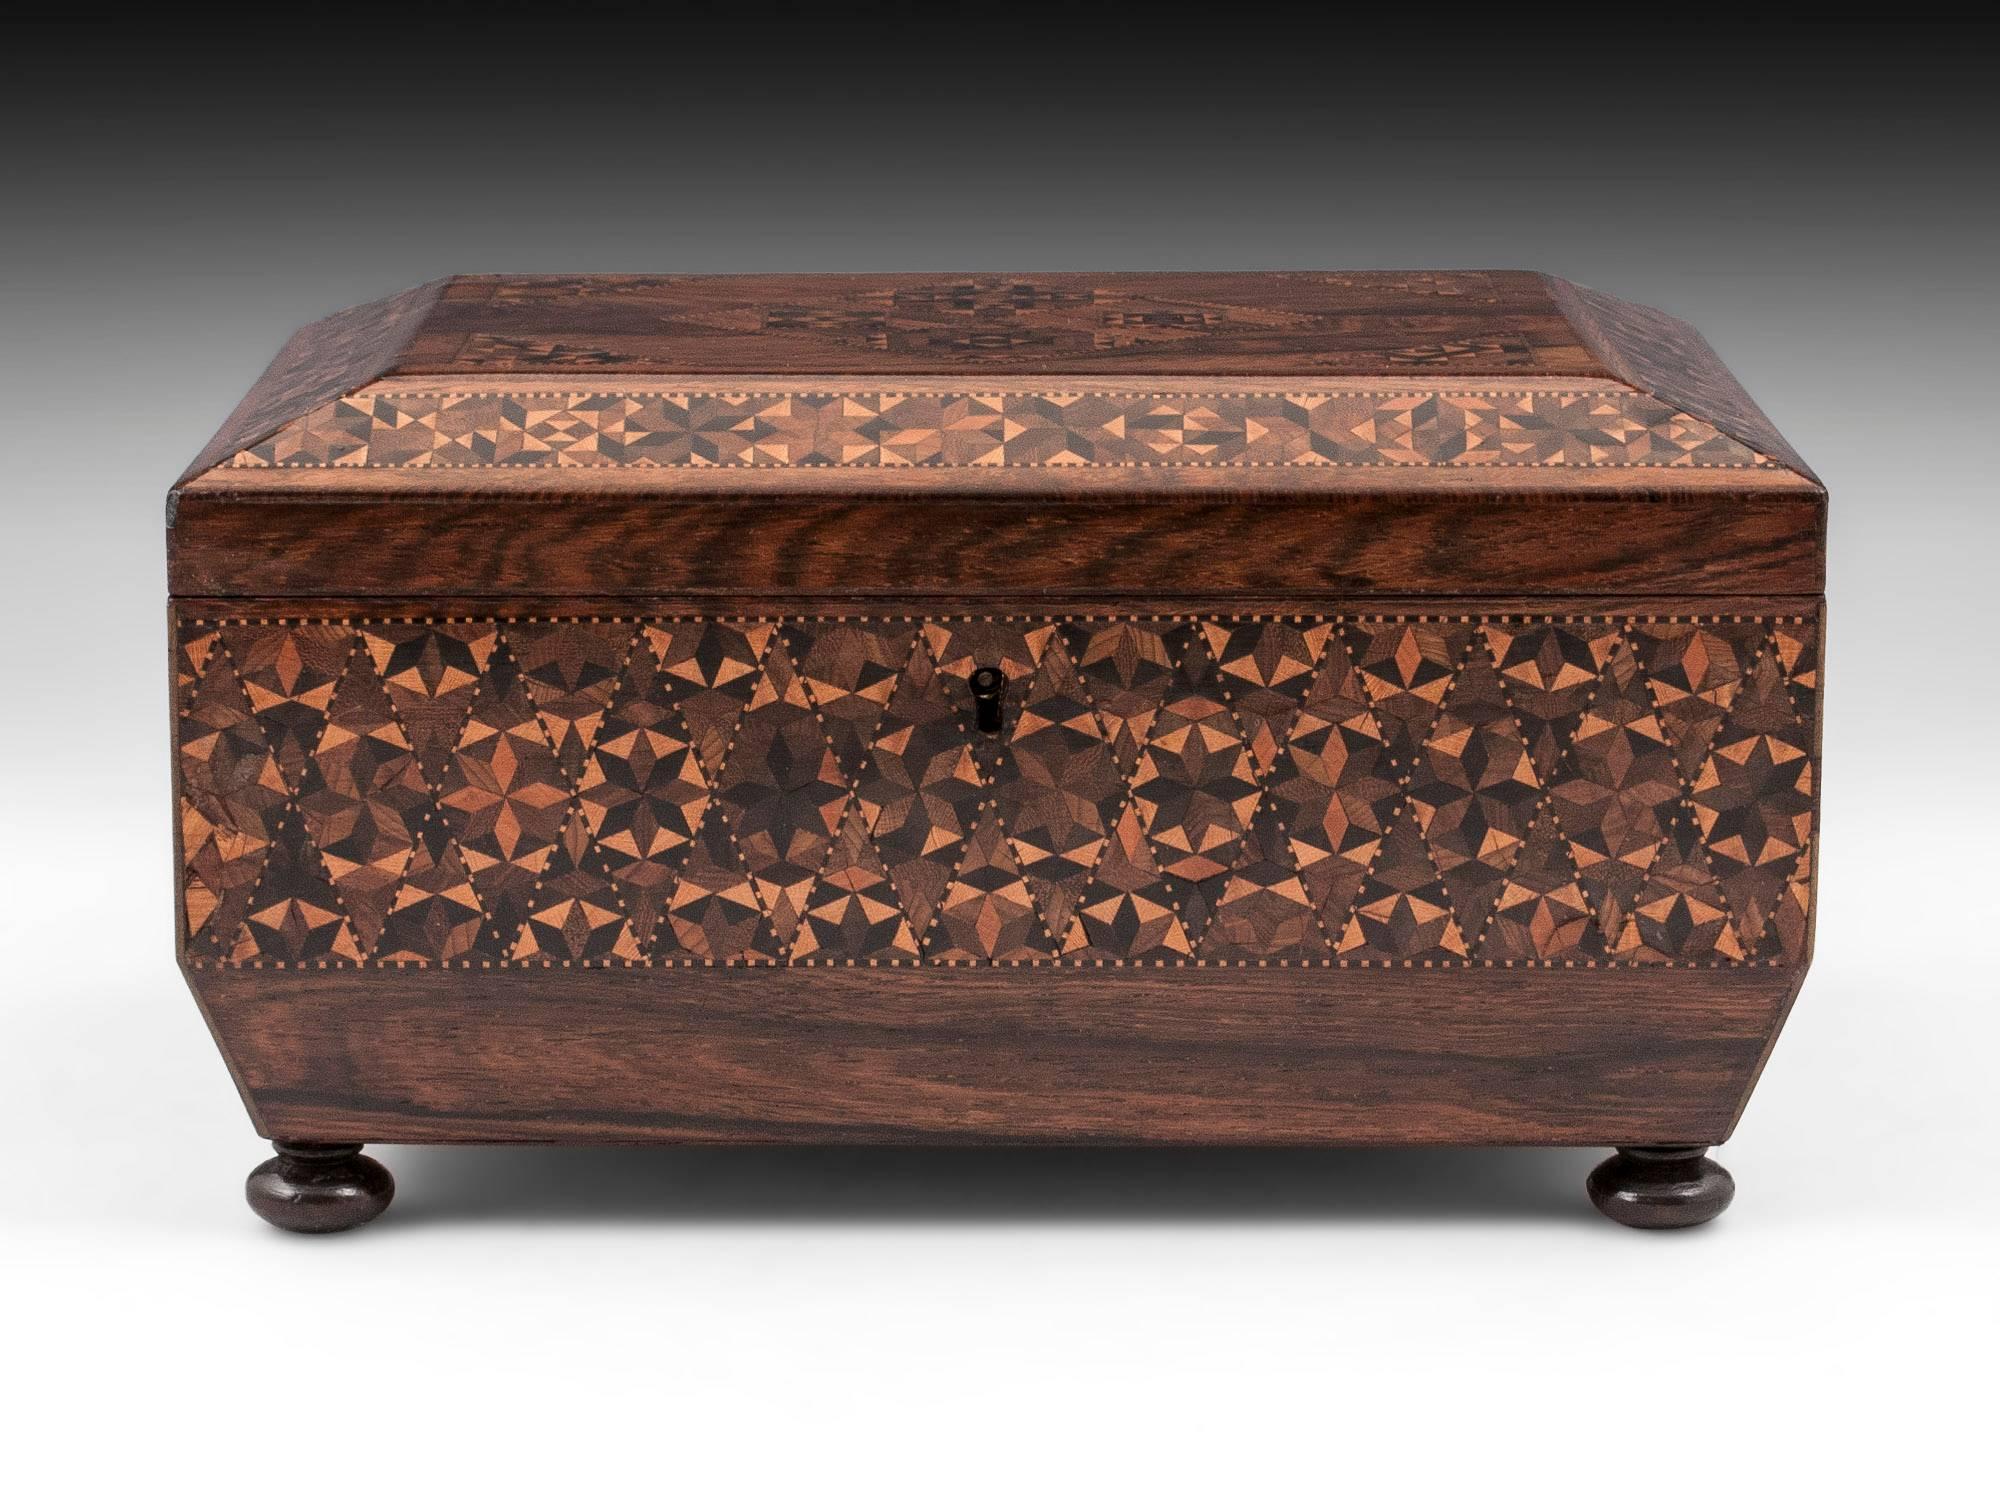 Tunbridge ware sewing box veneered in mahogany with micro mosaic bands running around the box with triangle and diamond patterns on the top. 

The Tunbridge sewing box interior features a removable yellow paper lined tray that contains six thread